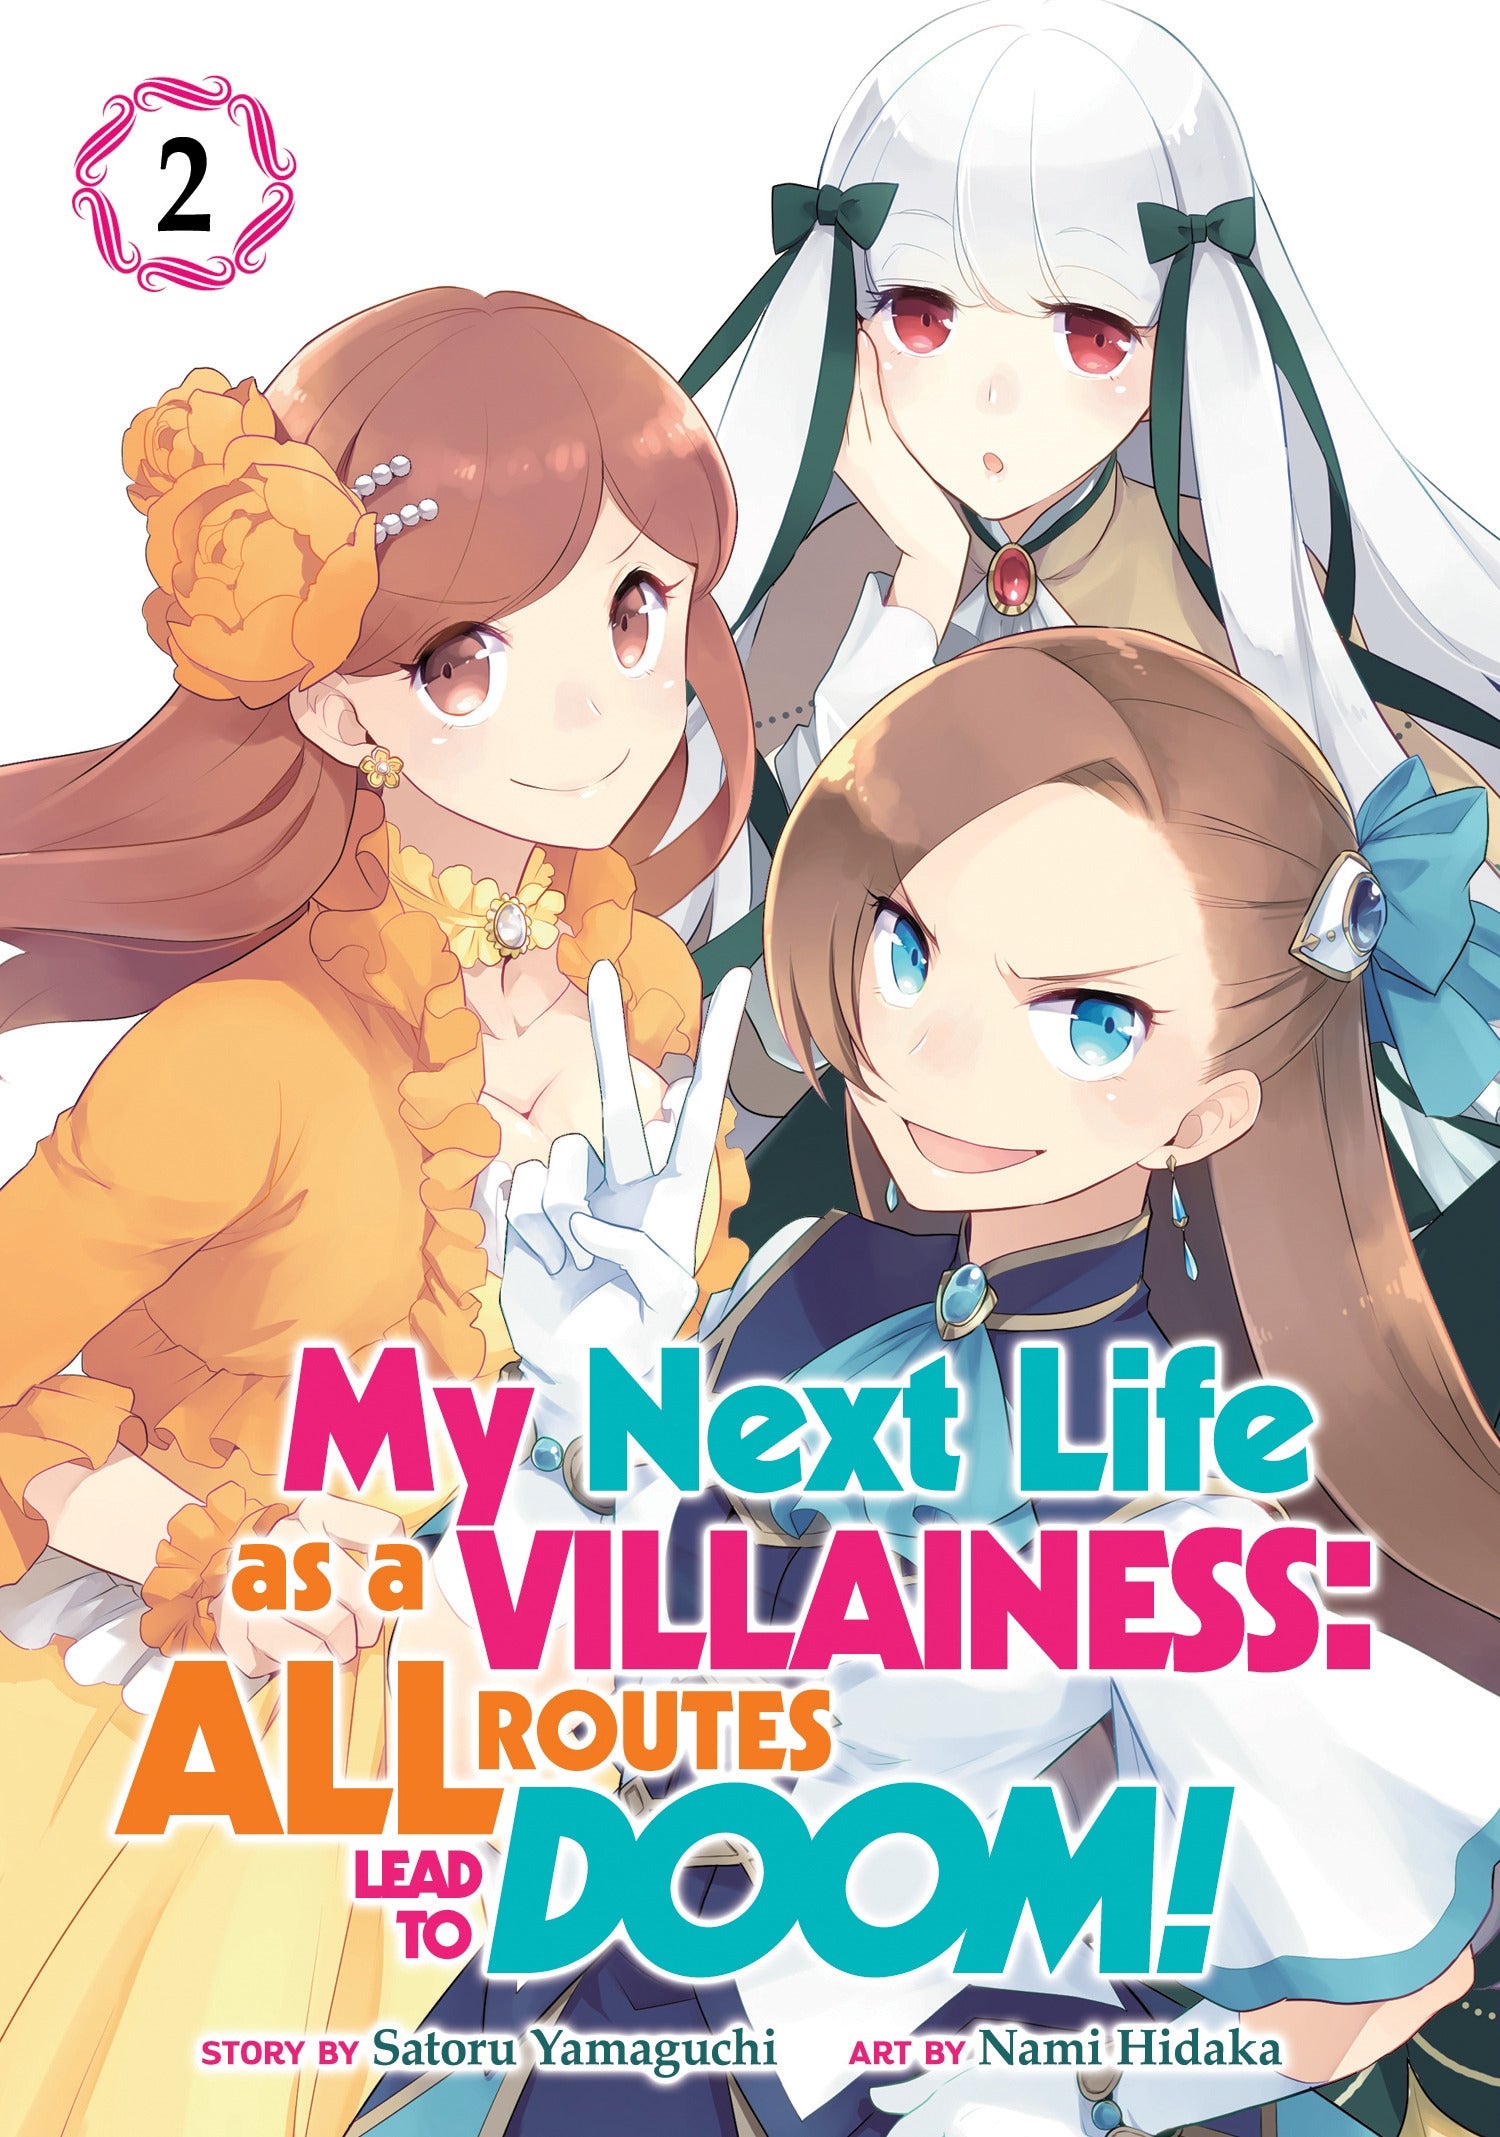 My Next Life as a Villainess : All Routes Lead to Doom! (Manga) Vol. 2 - Manga Warehouse